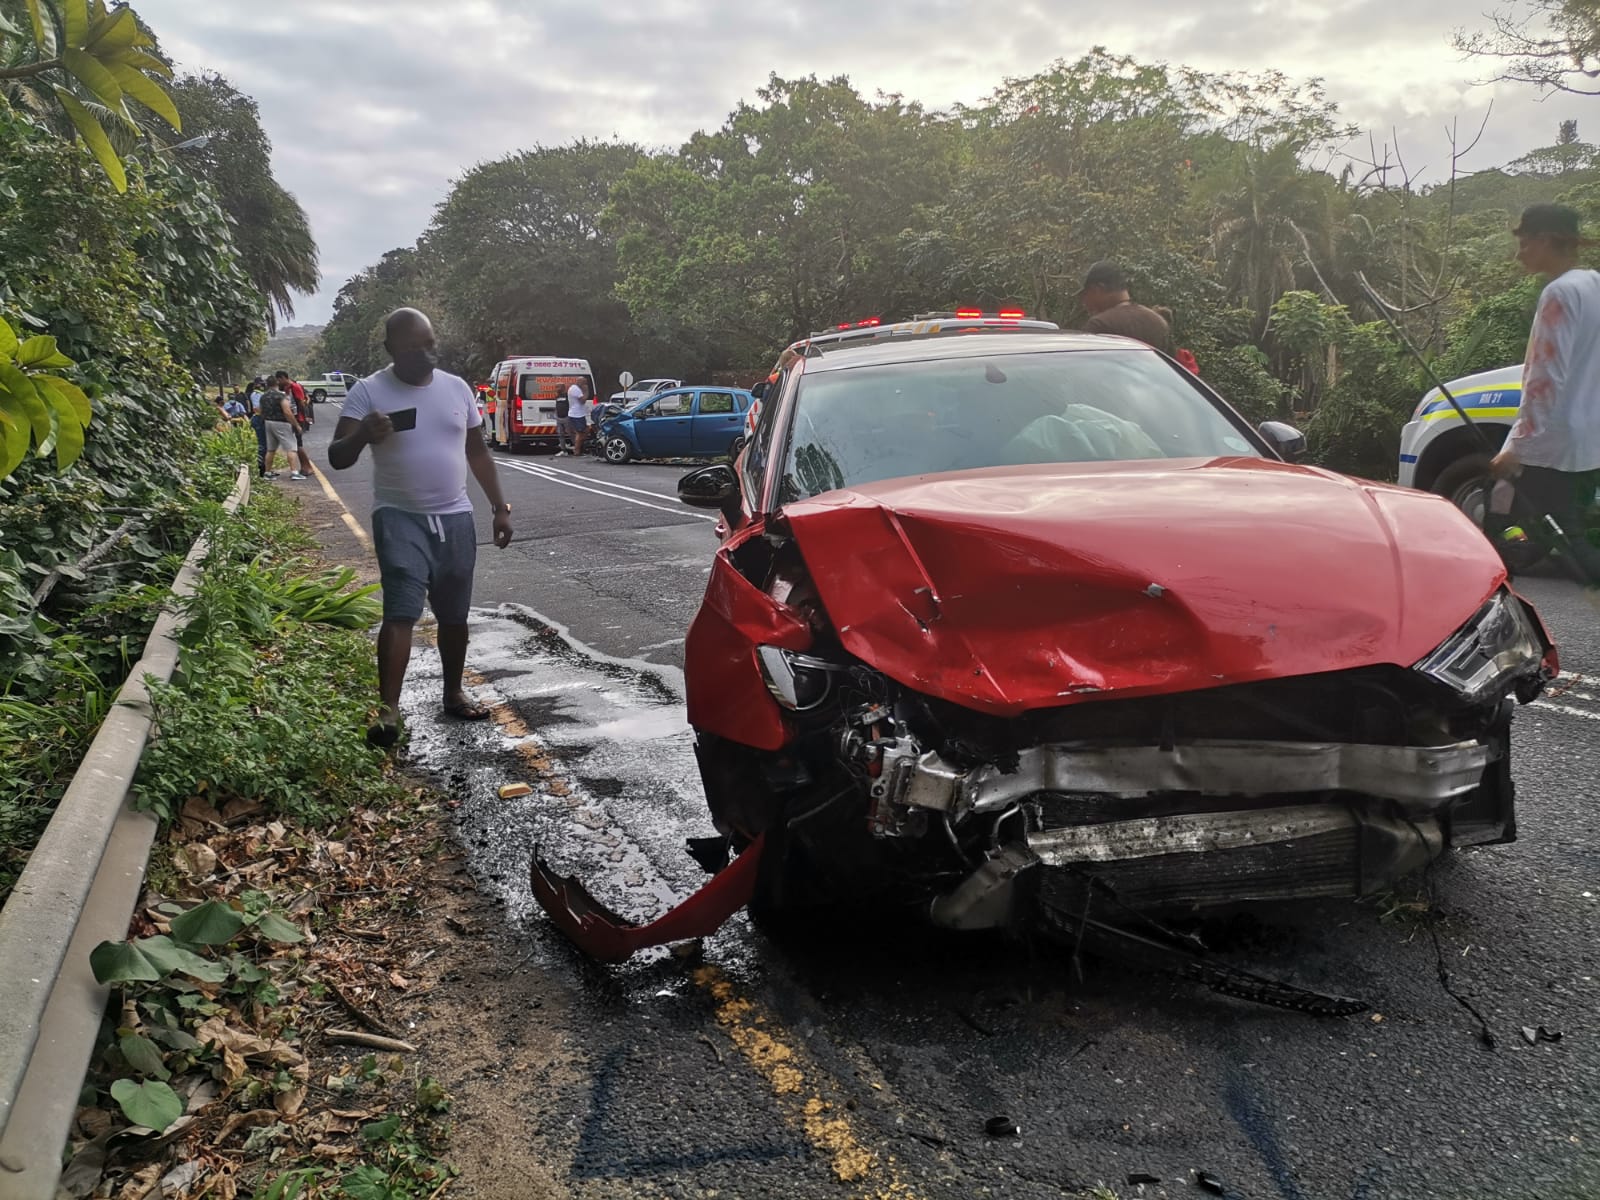 Crash victim resuscitated after a head-on crash on the R620 in Ramsgate